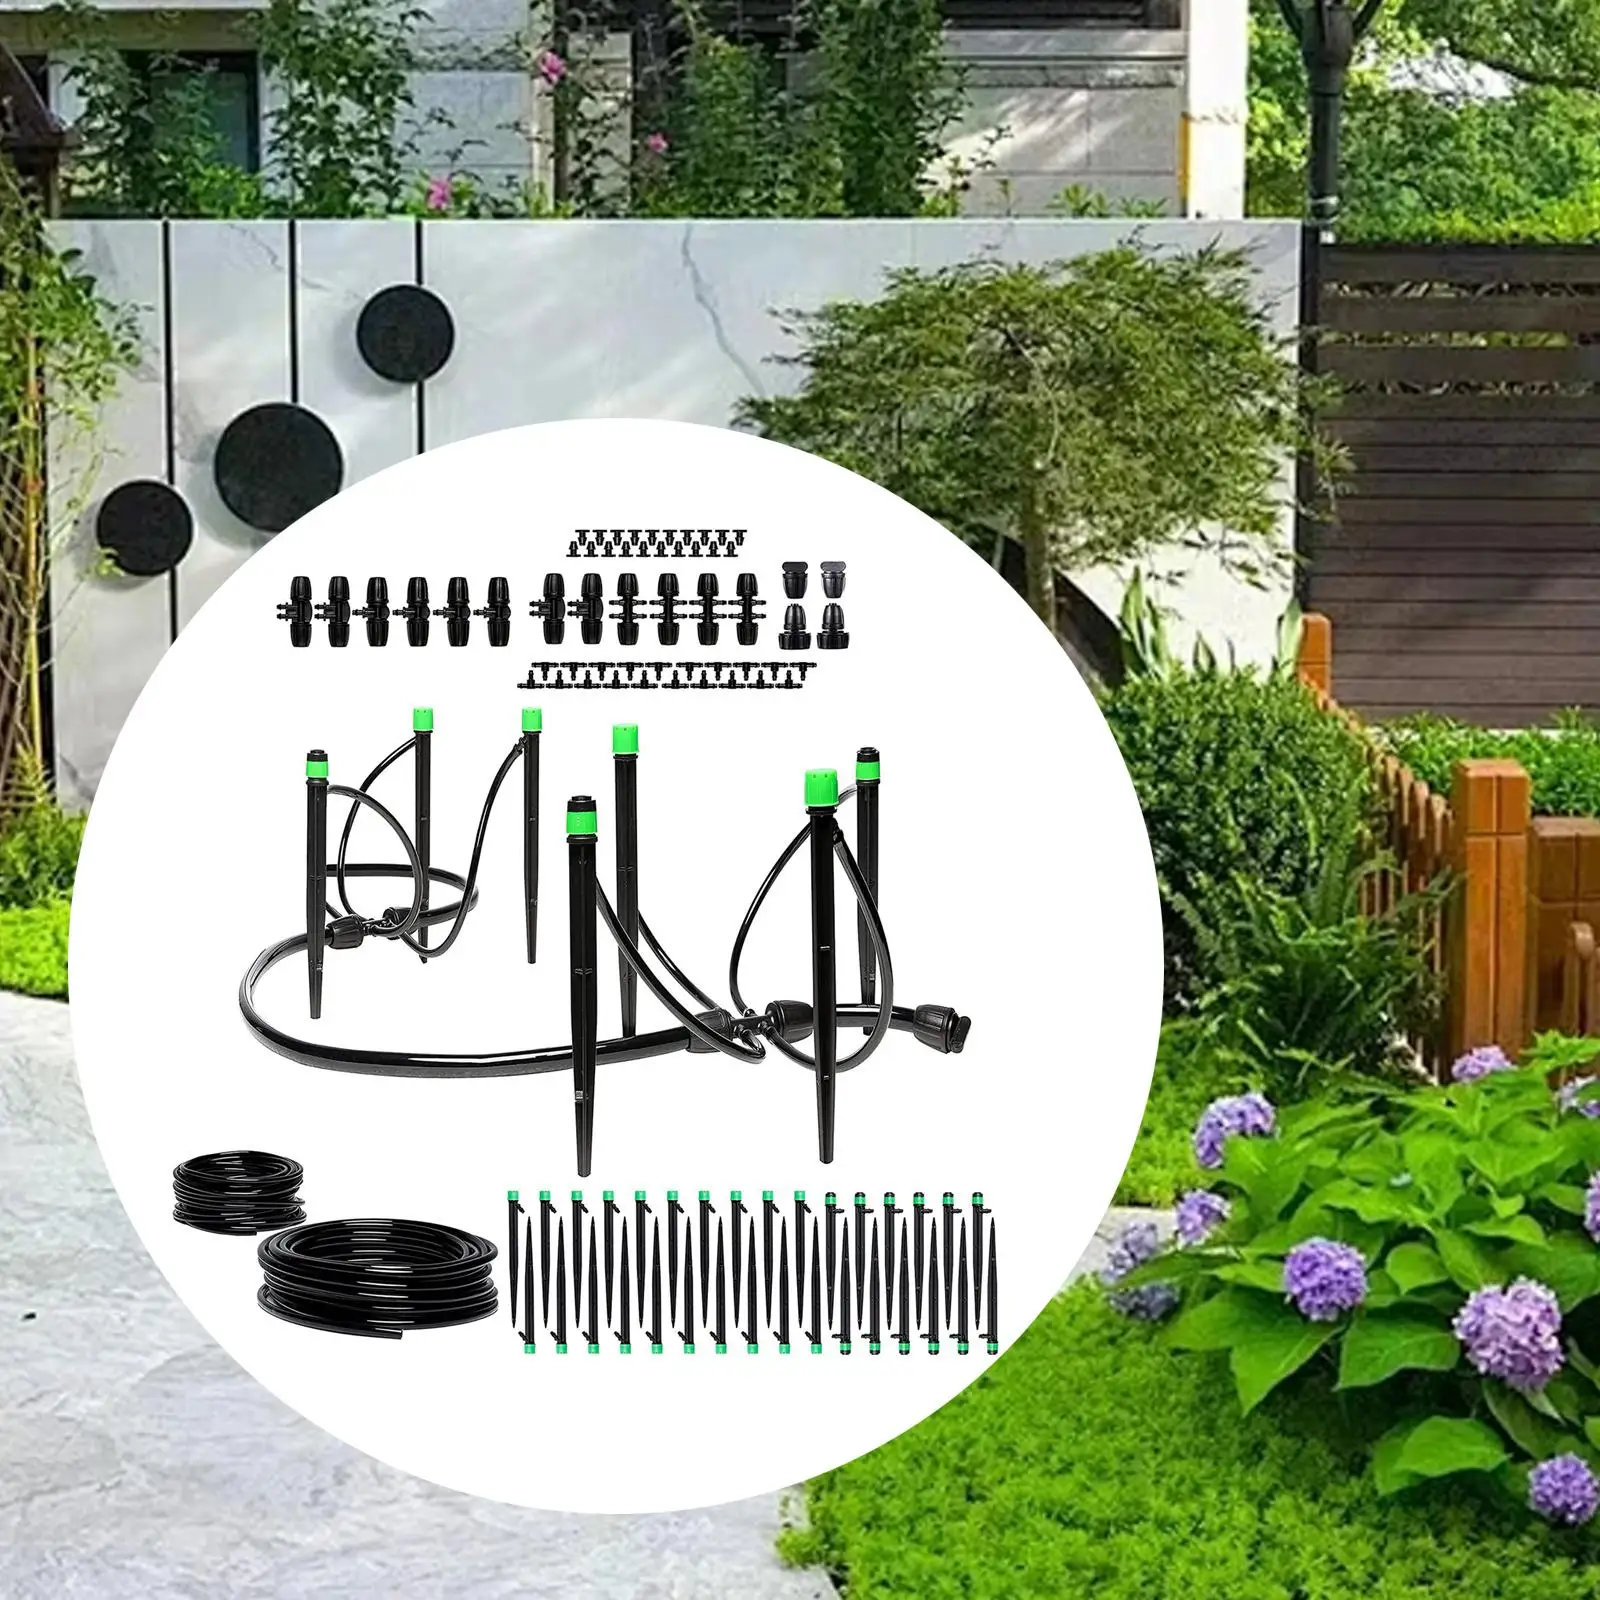 

Complete Drip Irrigation Kit Detachable Quick Connect Multipurpose Automatic Drip Watering System for Garden Lawn Easily Install